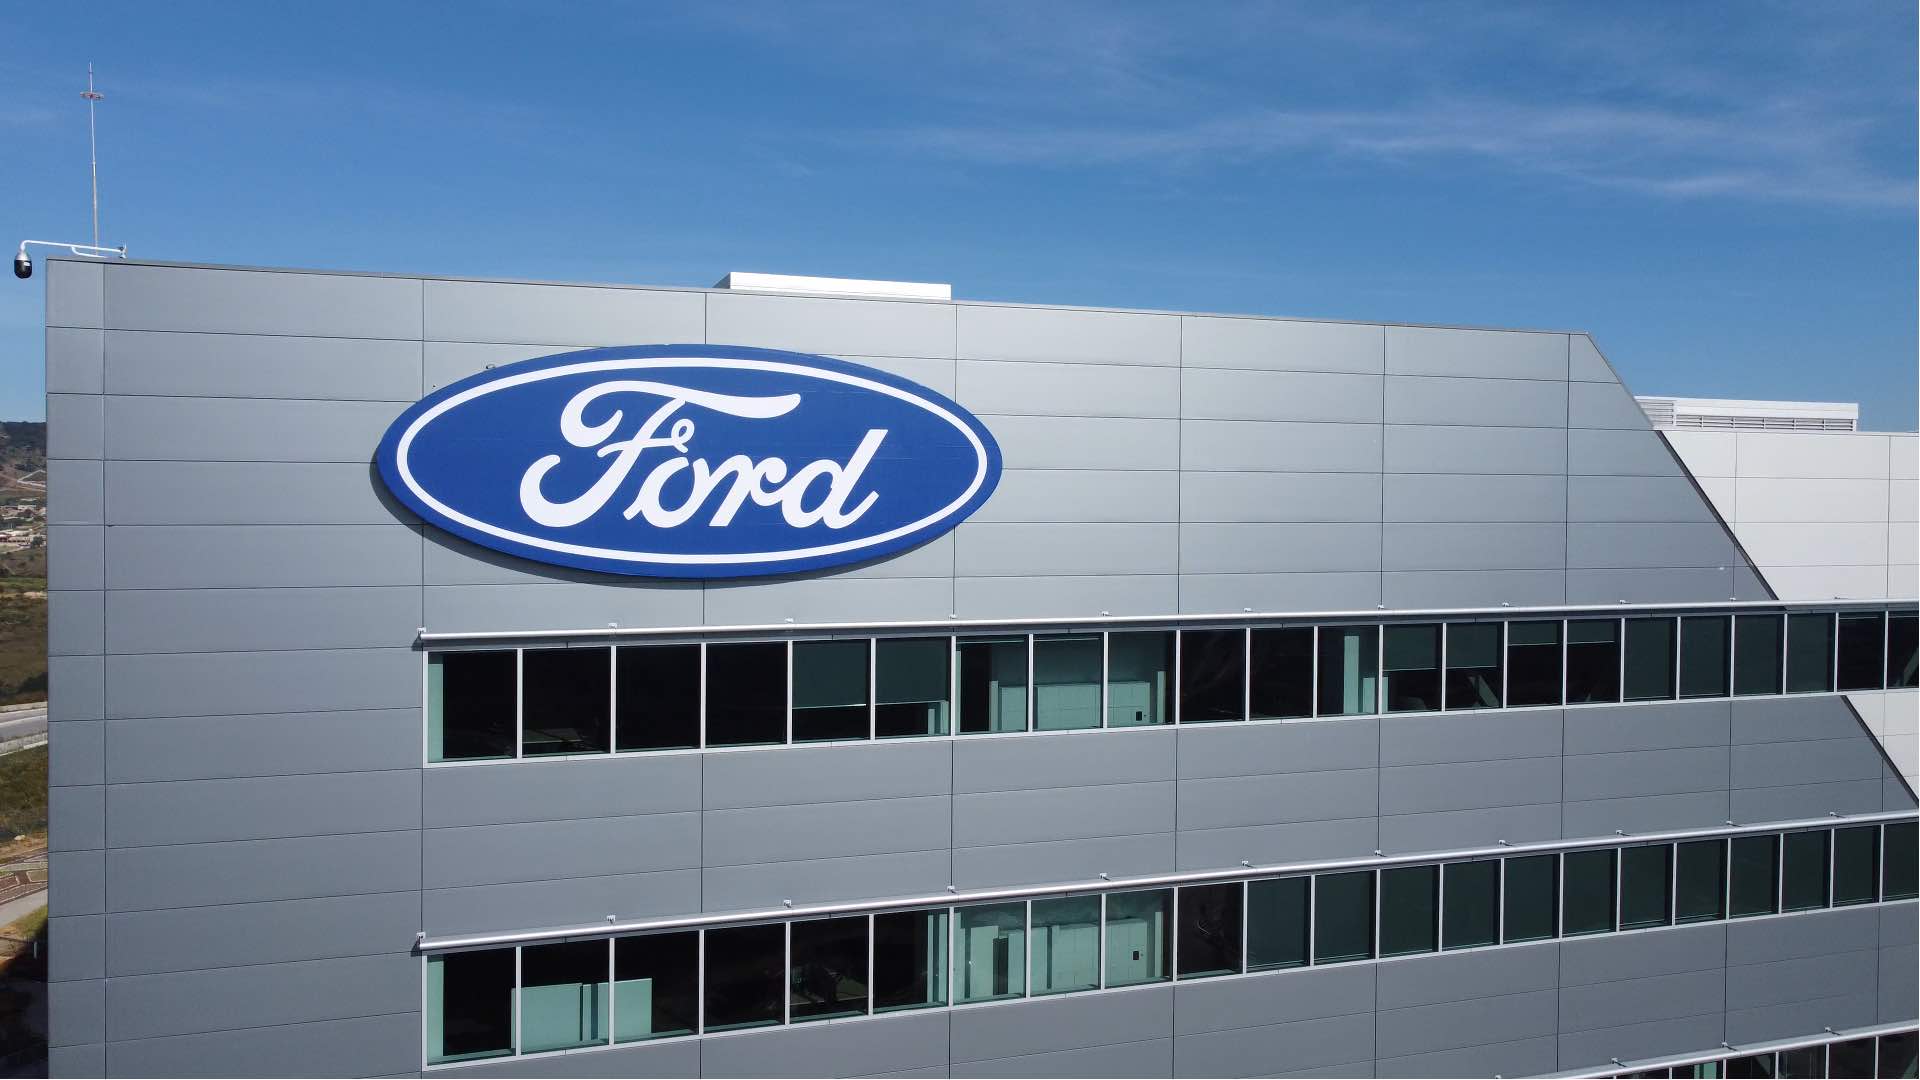 634,000 Ford vehicles are being recalled worldwide because of fire risks